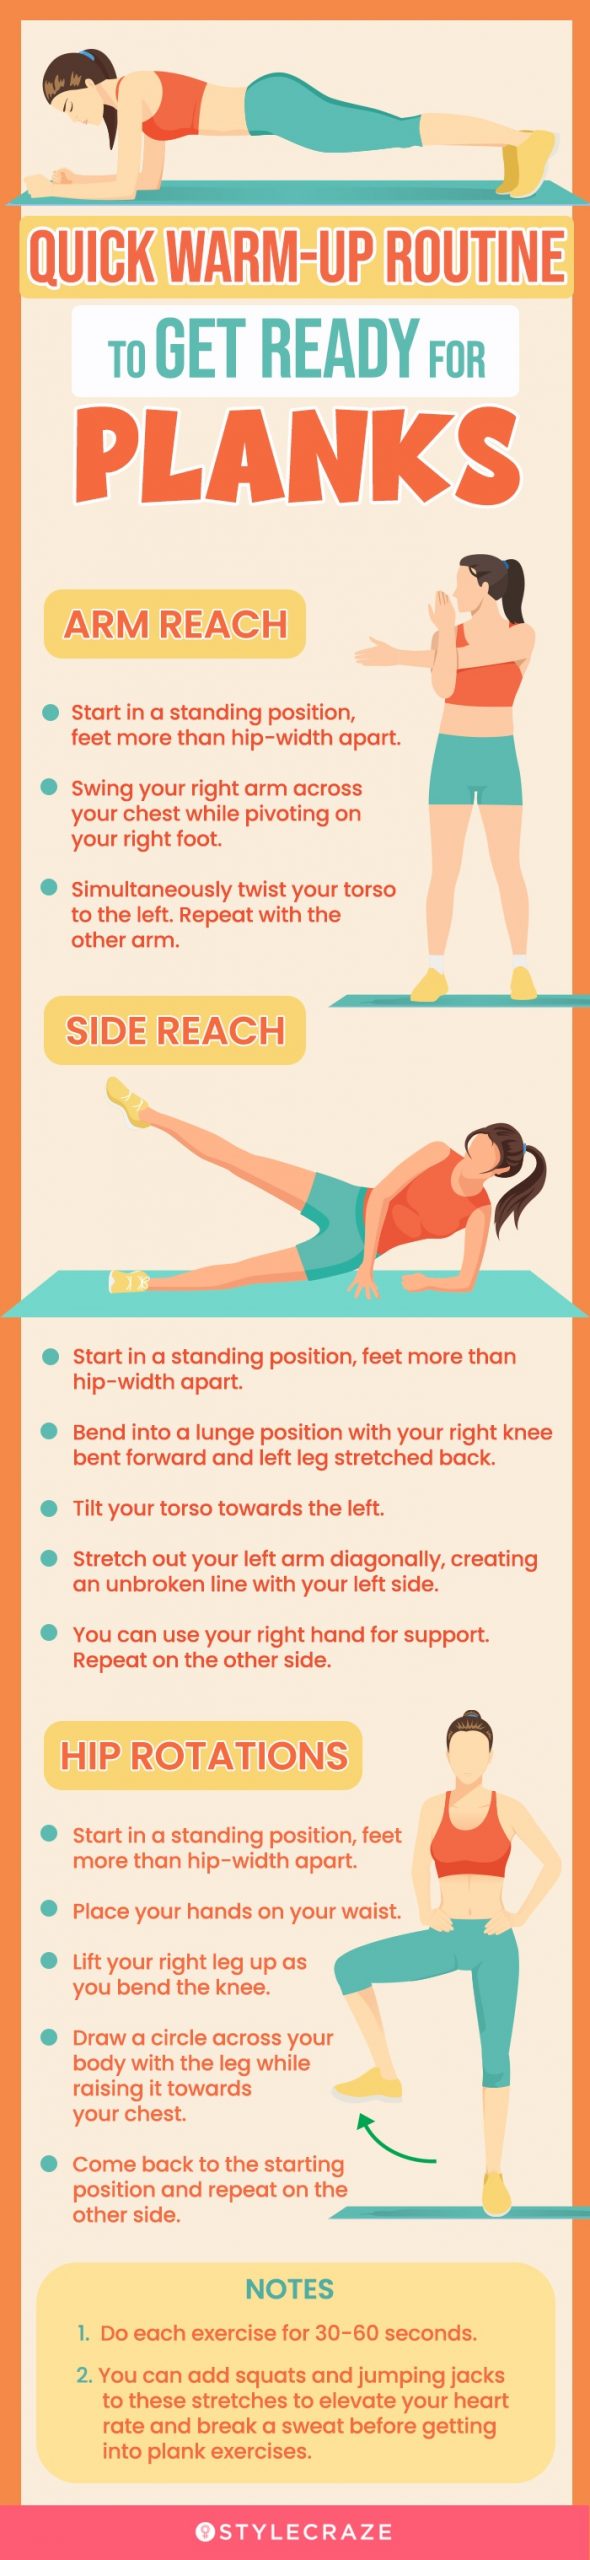 quick warm up routine to get ready for planks (infographic)